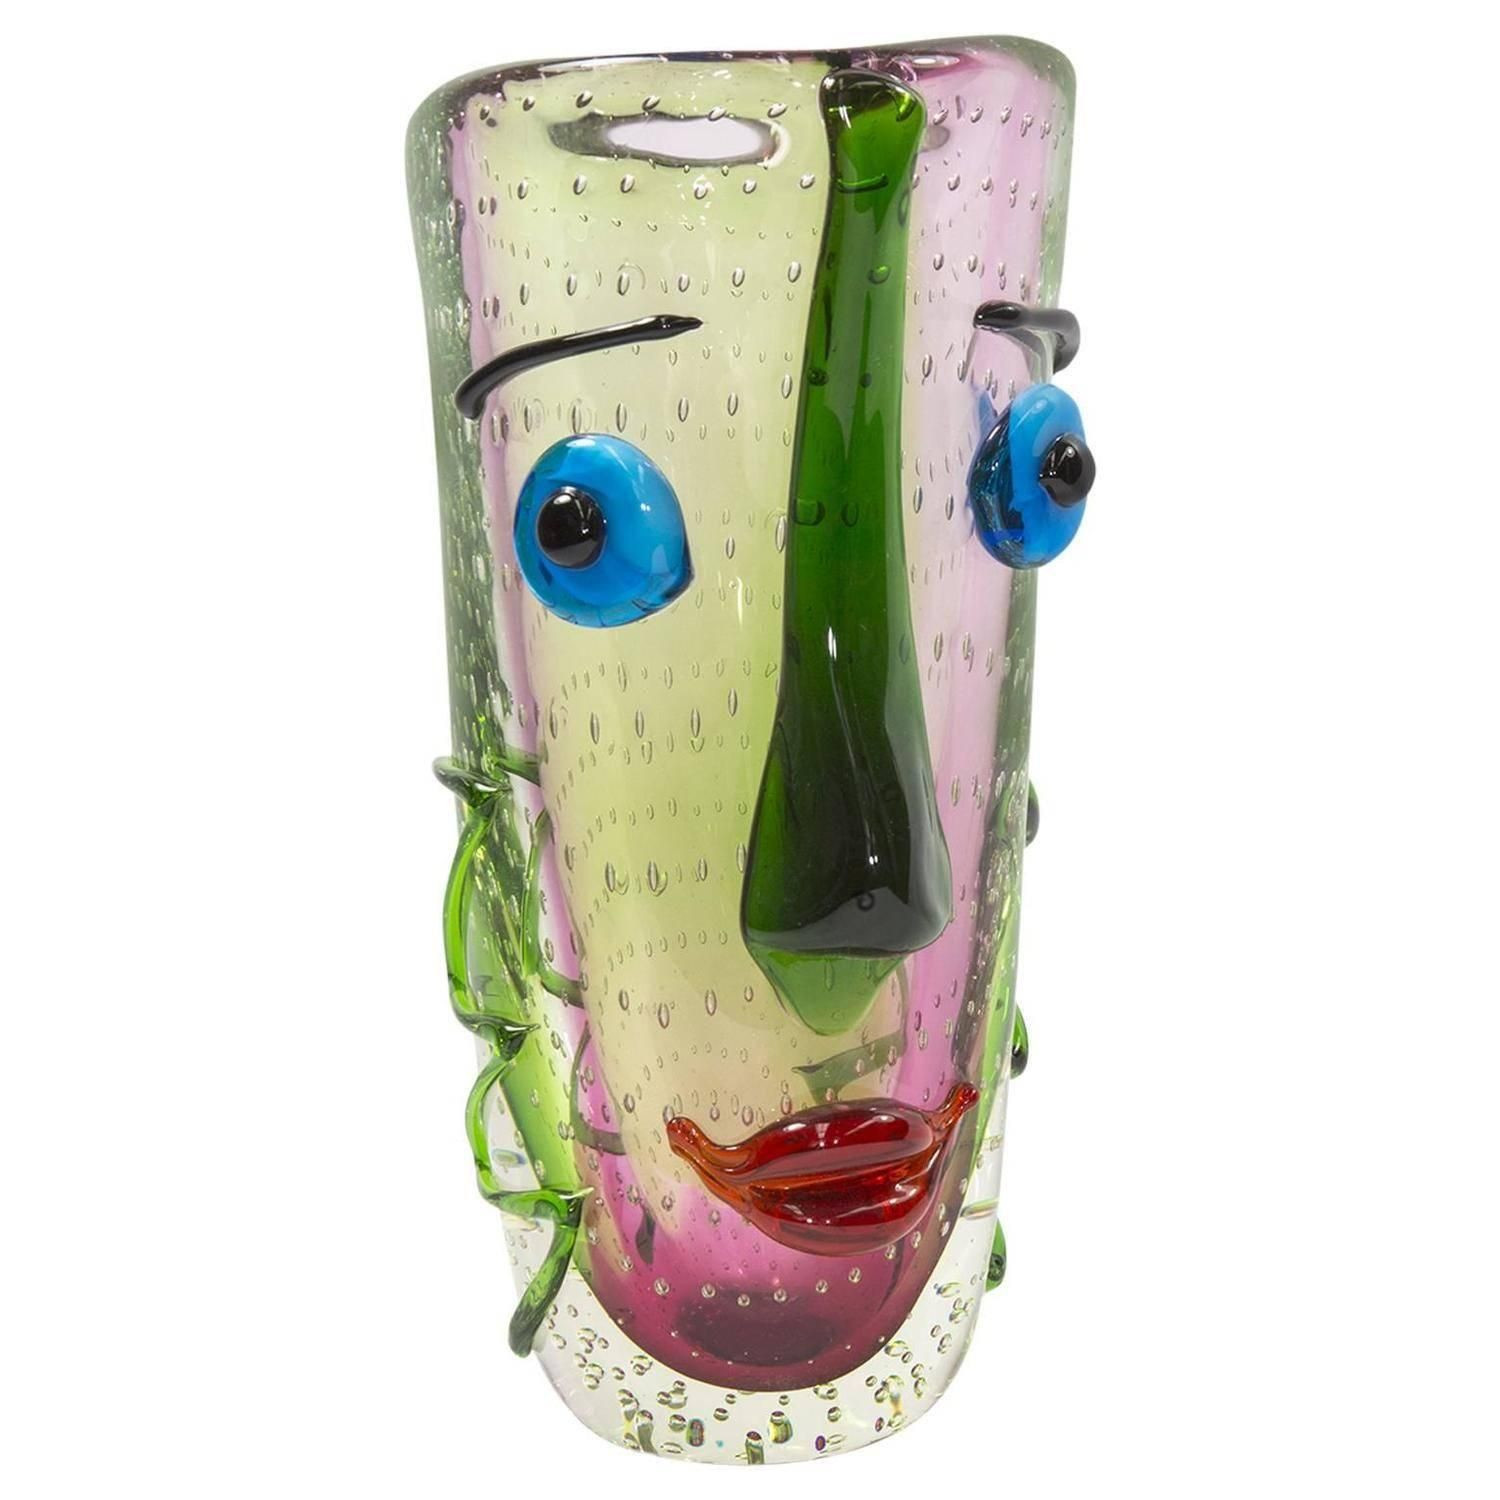 25 Best Clear Glass Fish Shaped Vase 2024 free download clear glass fish shaped vase of fabulous large murano multicolored abstract picasso face art glass in fabulous large murano multicolored abstract picasso face art glass vase